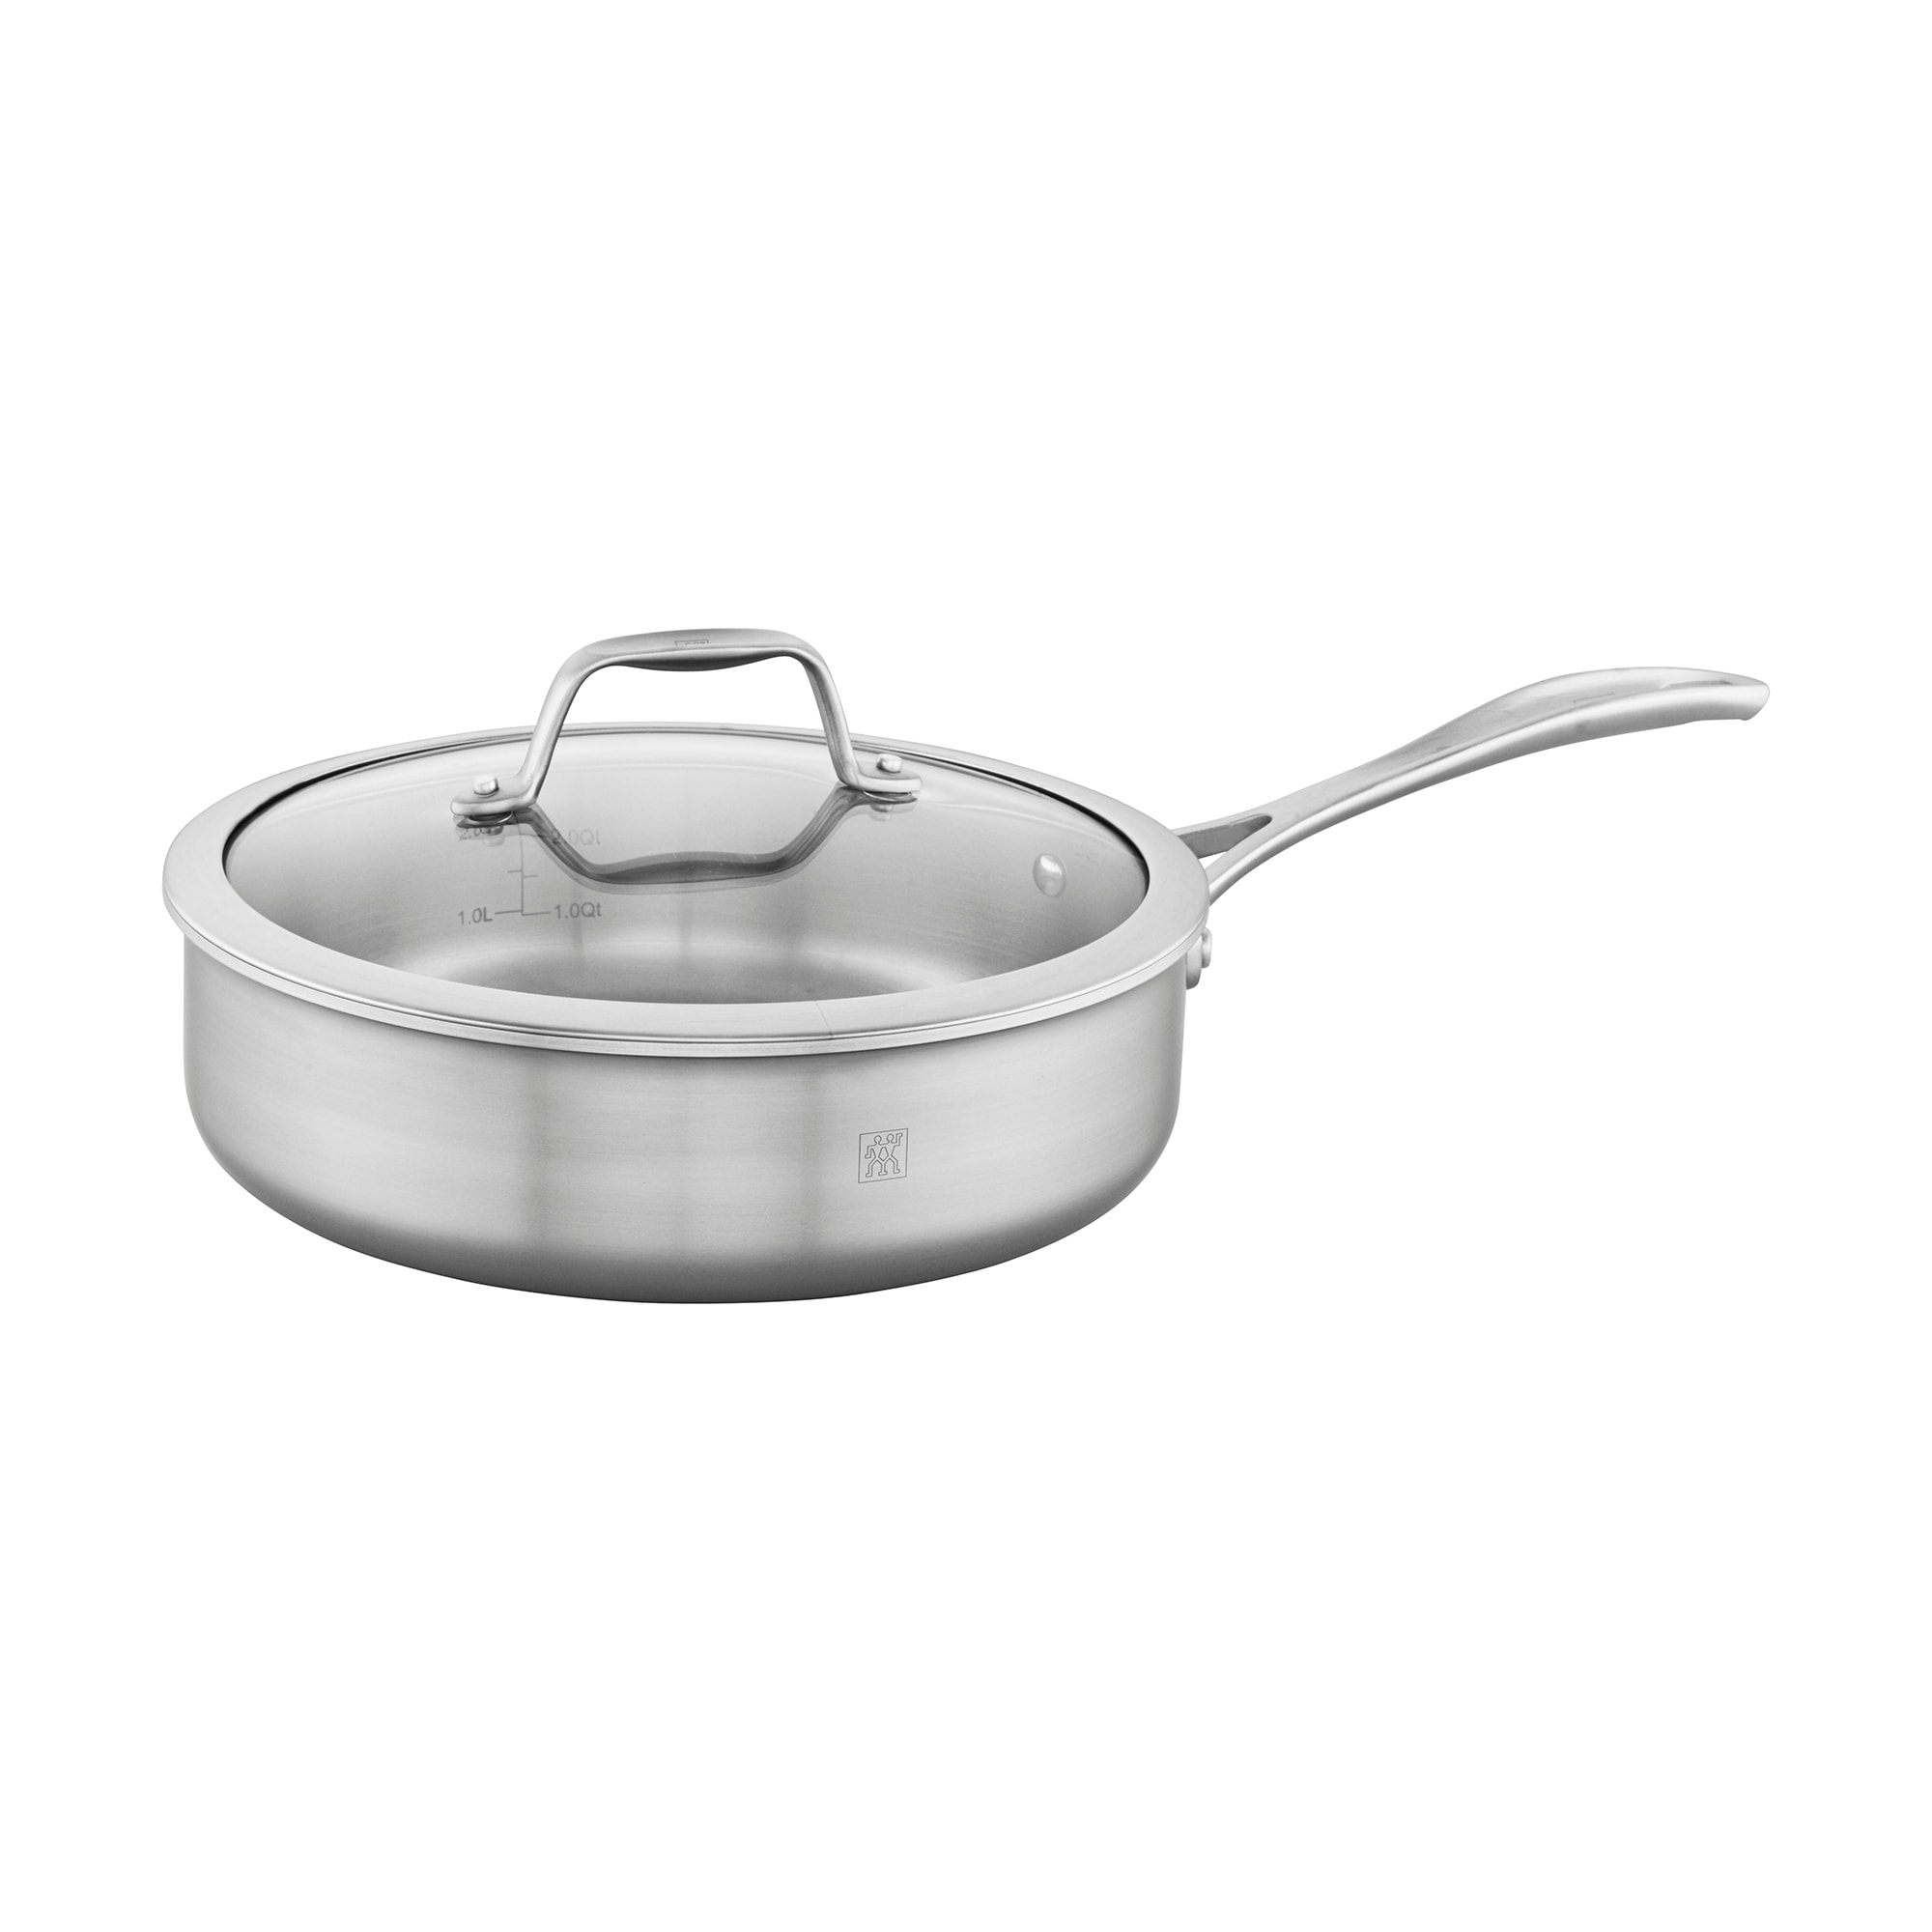 https://ak1.ostkcdn.com/images/products/is/images/direct/ff3d99f7f3f1730050b67cc6db5c773eccf1ab54/ZWILLING-Spirit-3-ply-Stainless-Steel-Saute-Pan.jpg